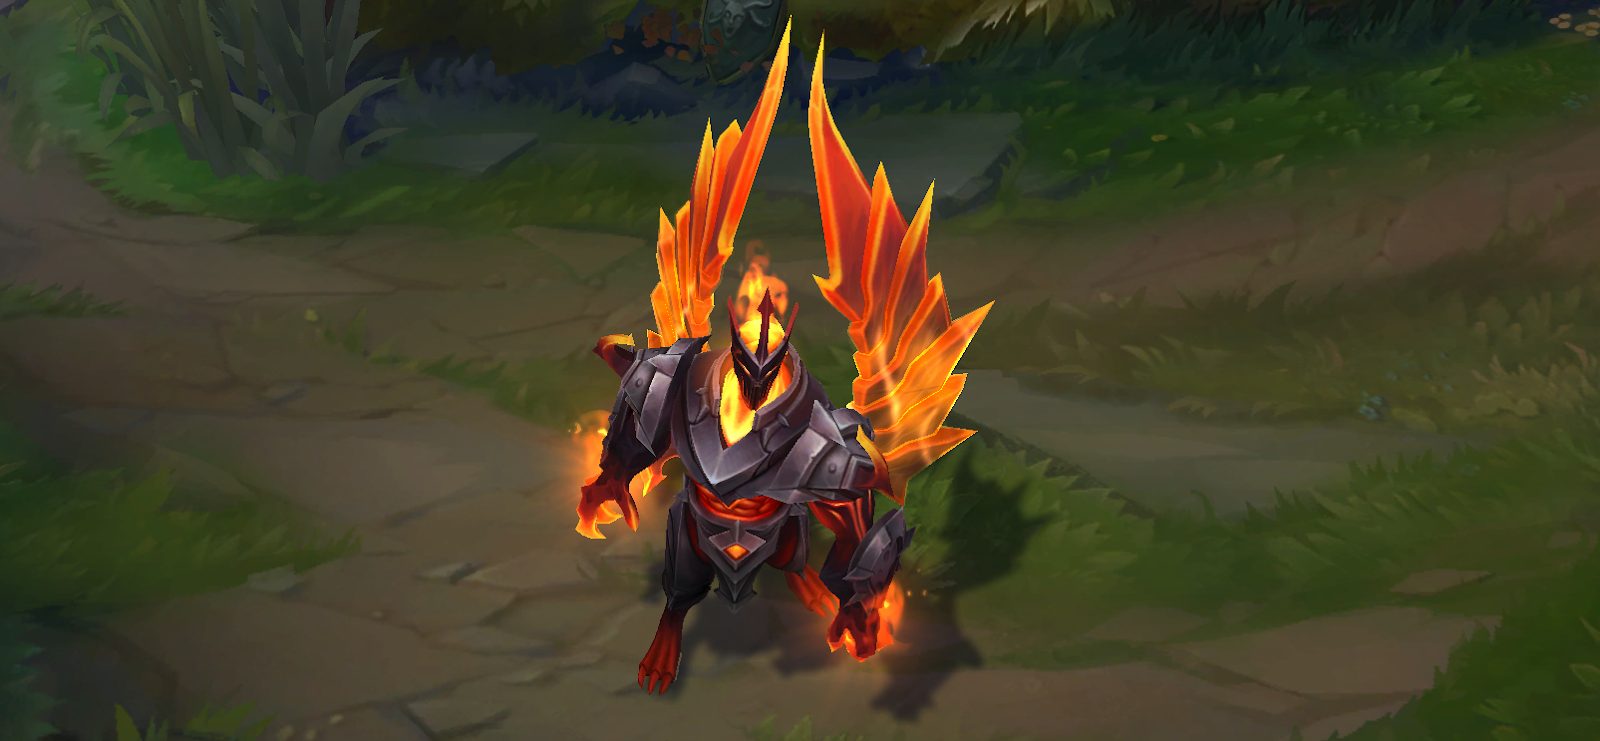 infernal galio skin for league of legends ingame picture